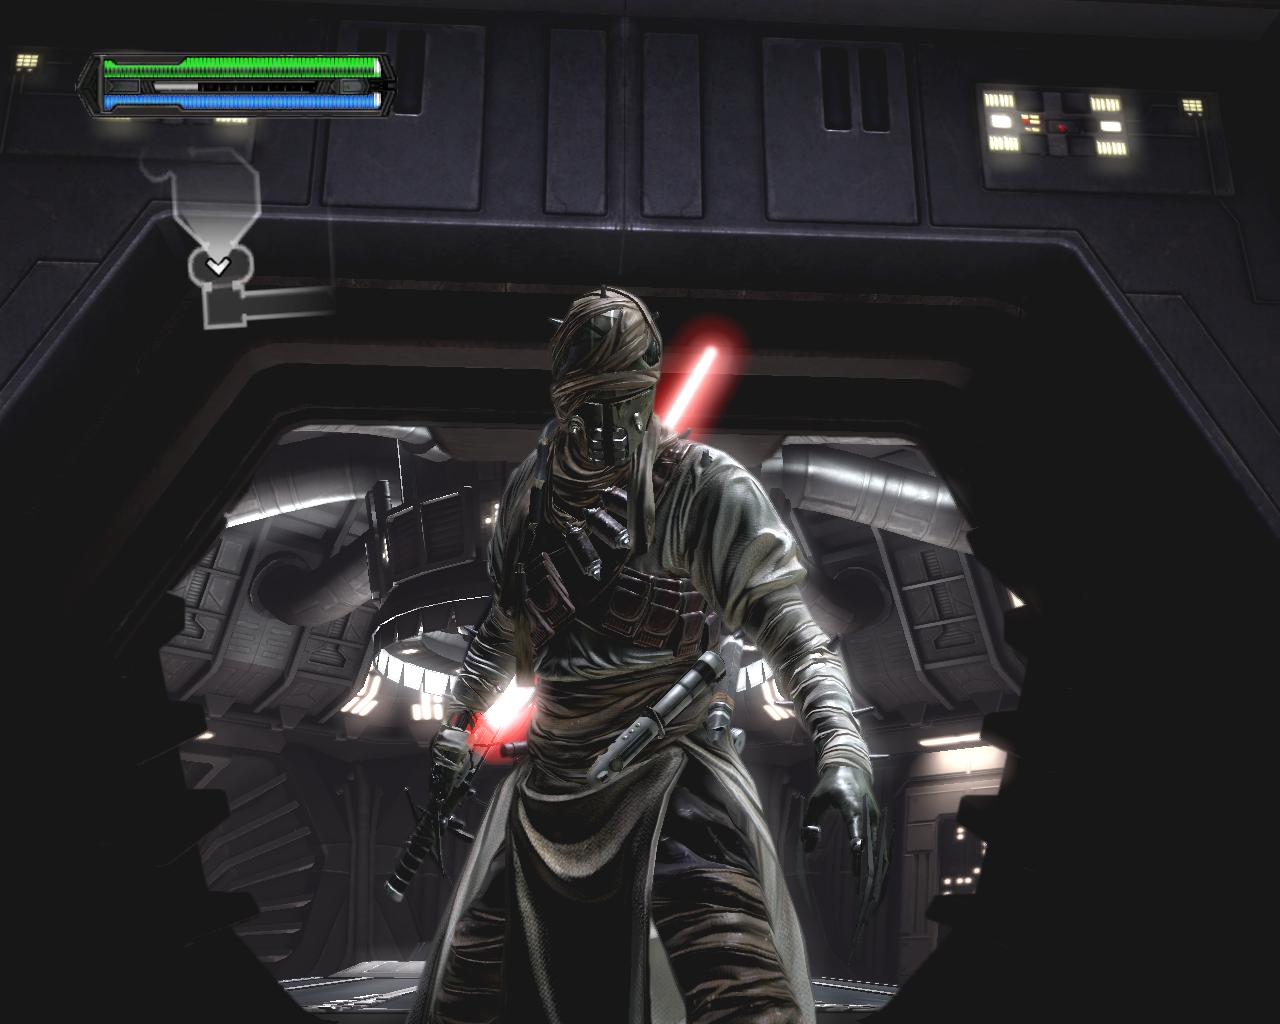 Star Wars: The Force Unleashed.